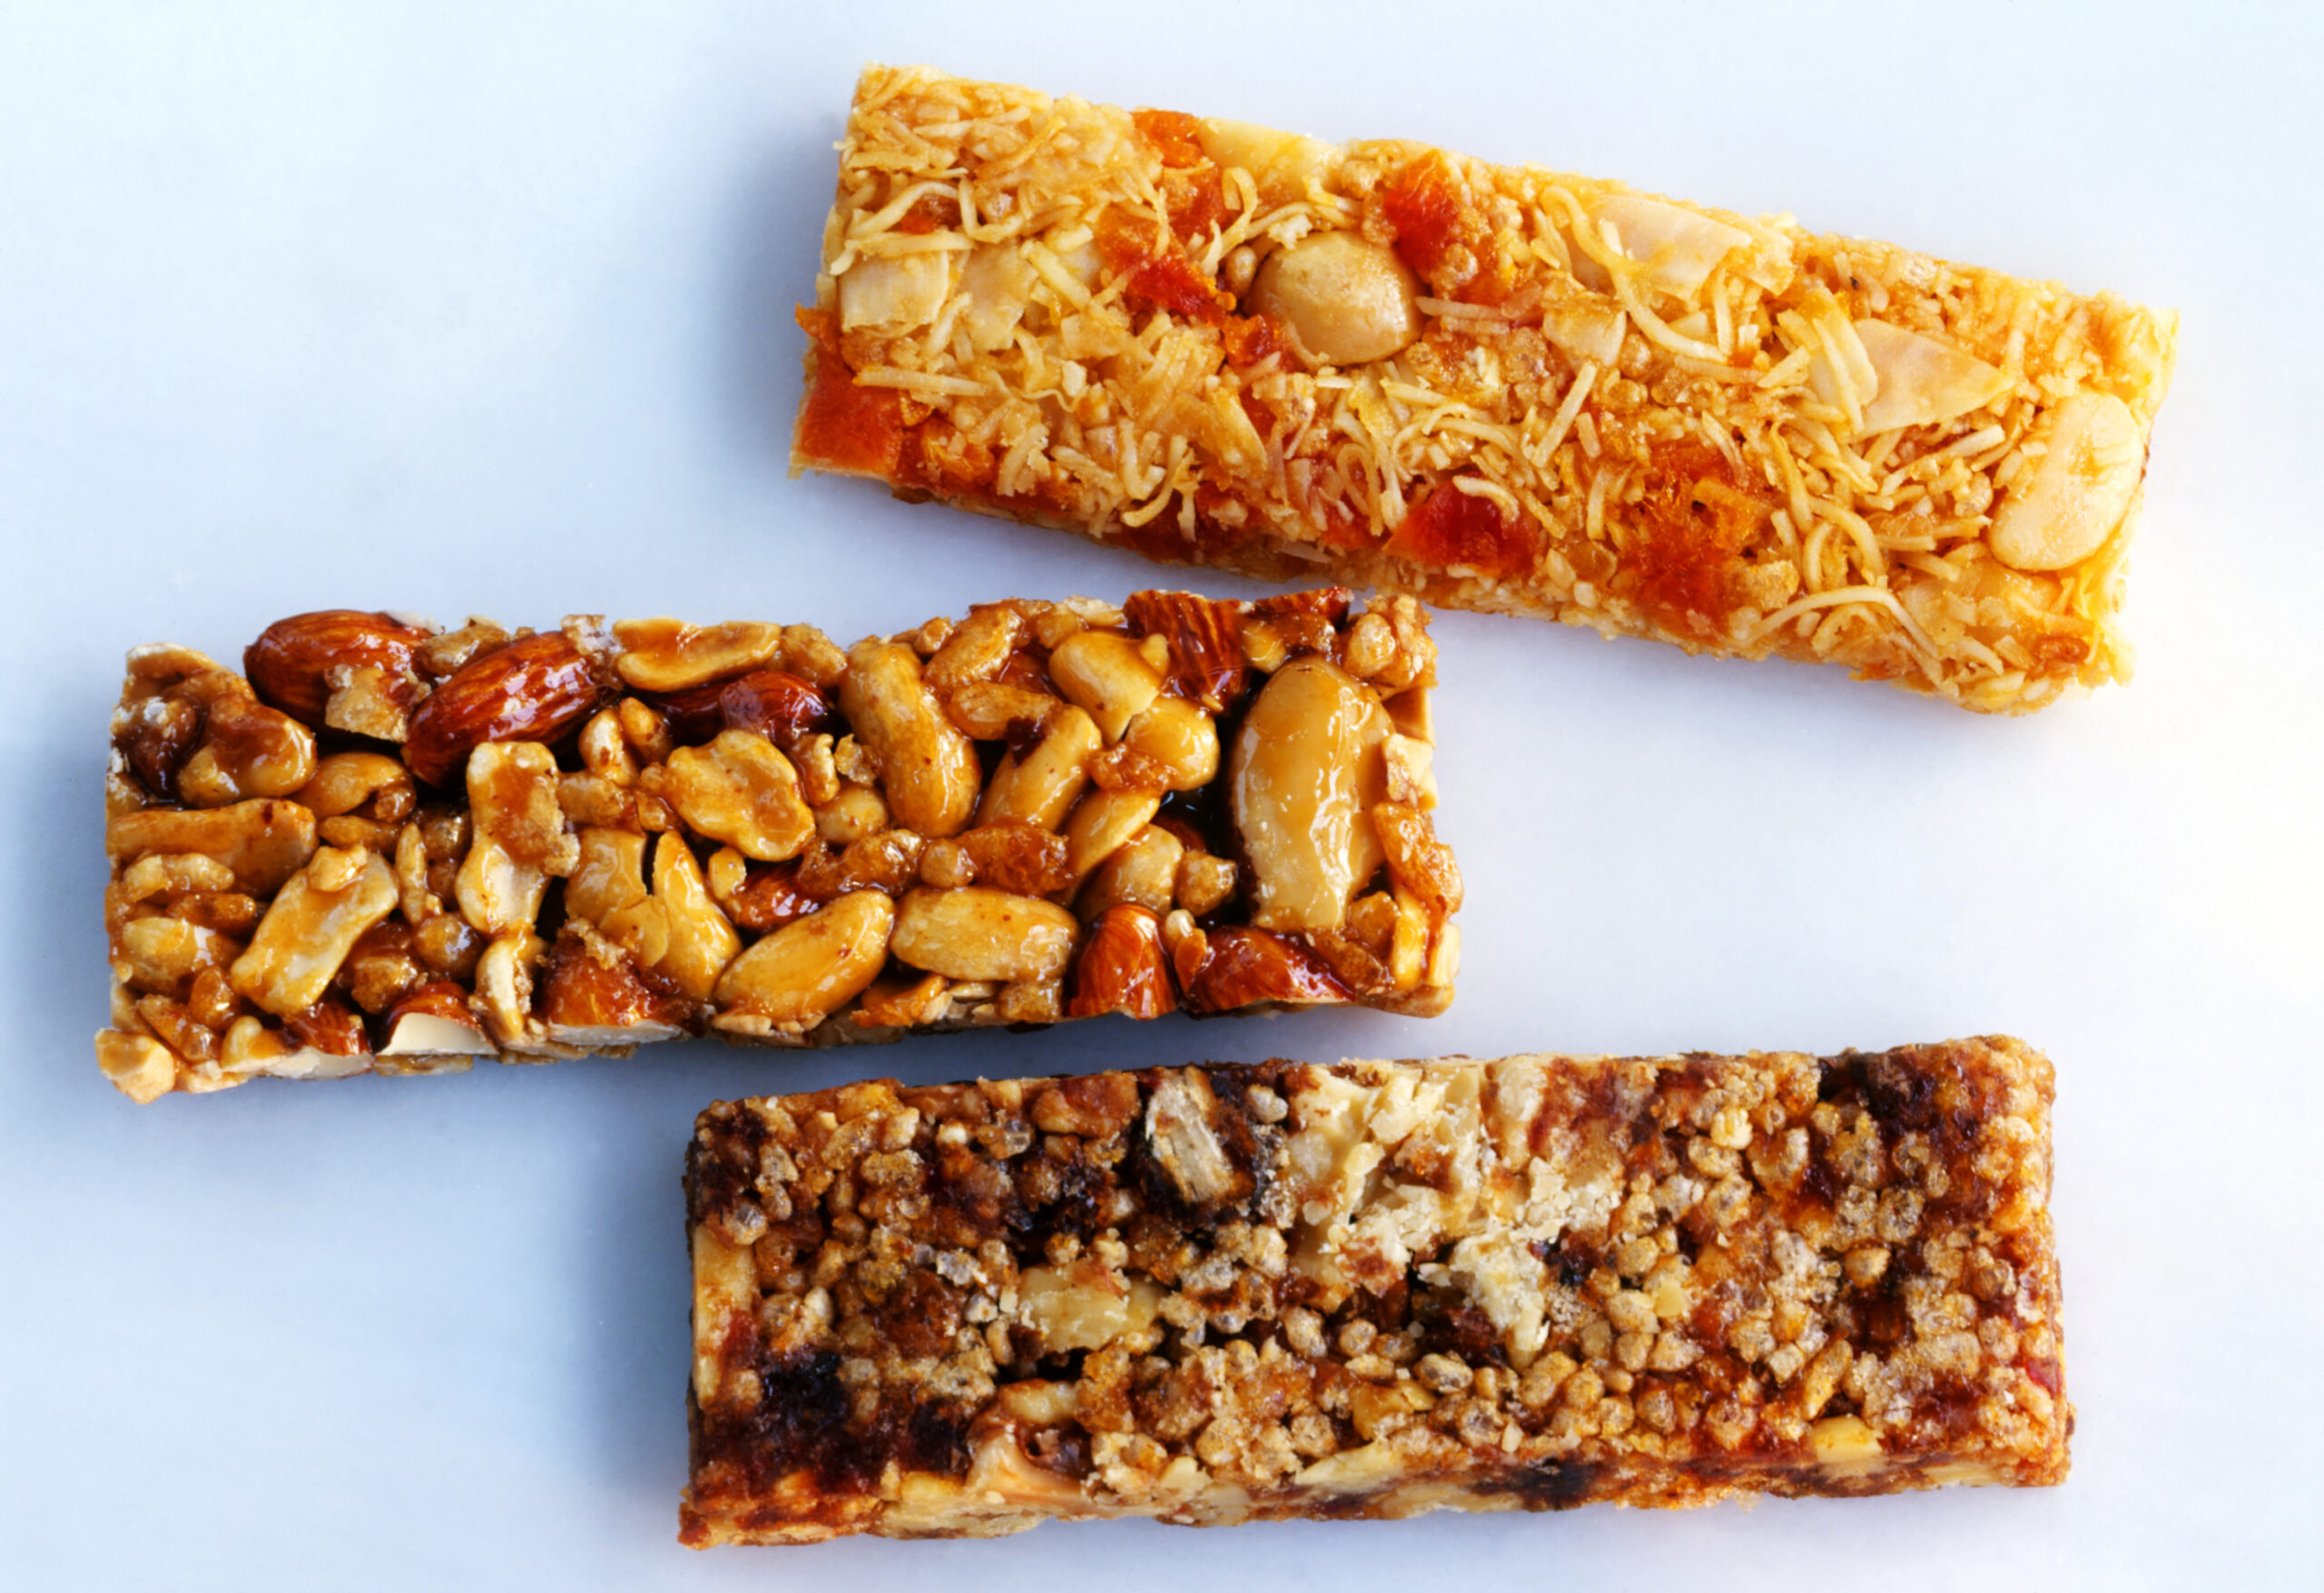 The 10 Best Meal Replacement Bars